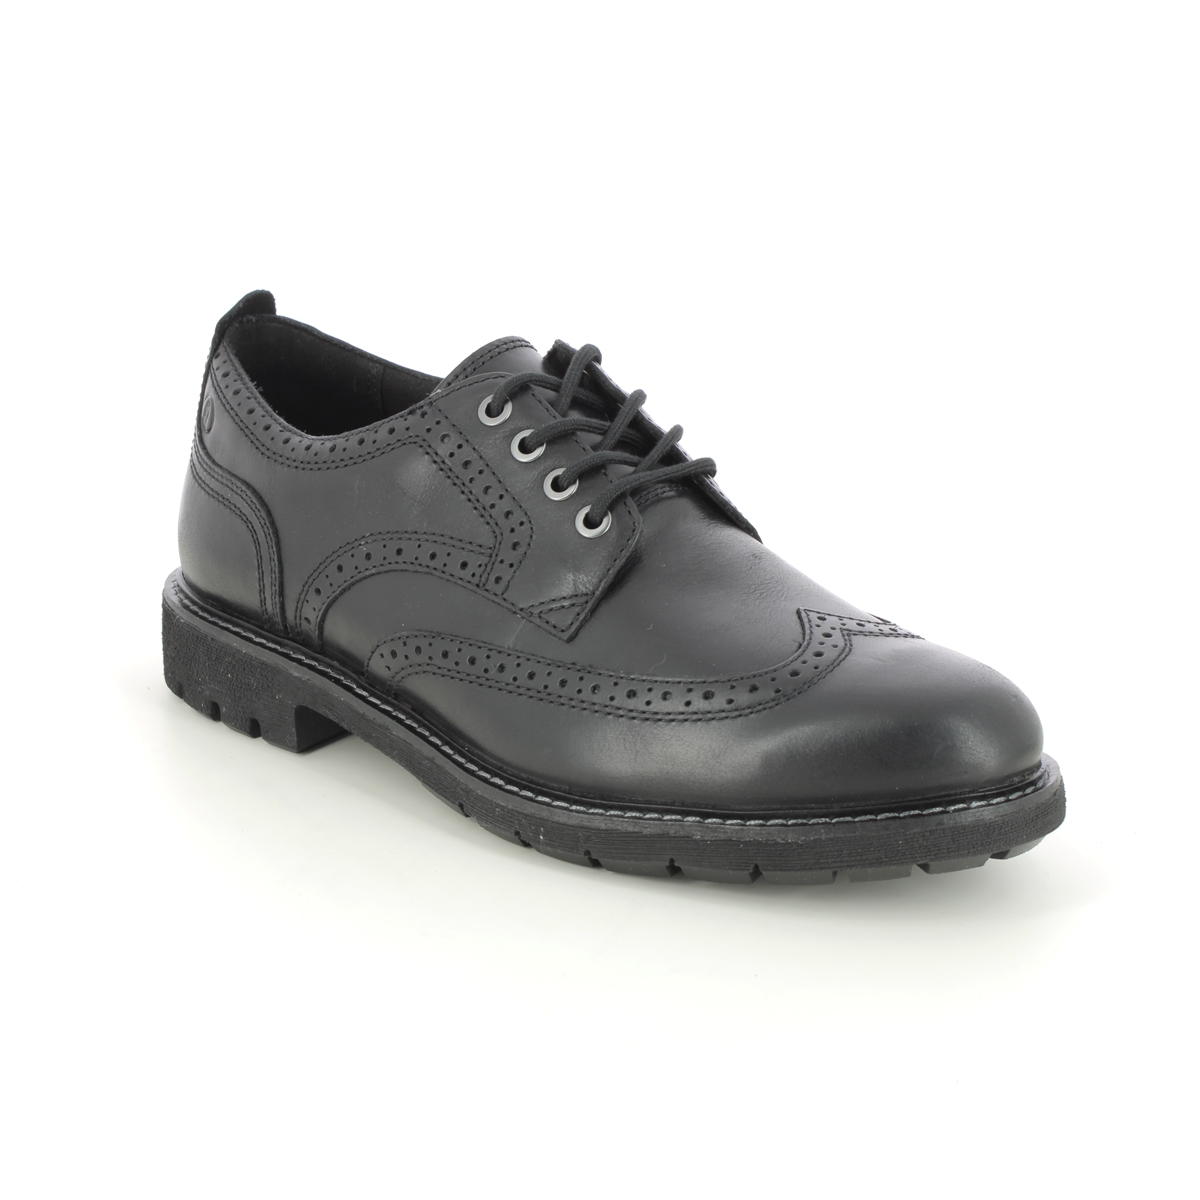 Clarks Batcombe Far Wing Black Leather Mens Brogues 734387G In Size 10.5 In Plain Black Leather G Width Fitting